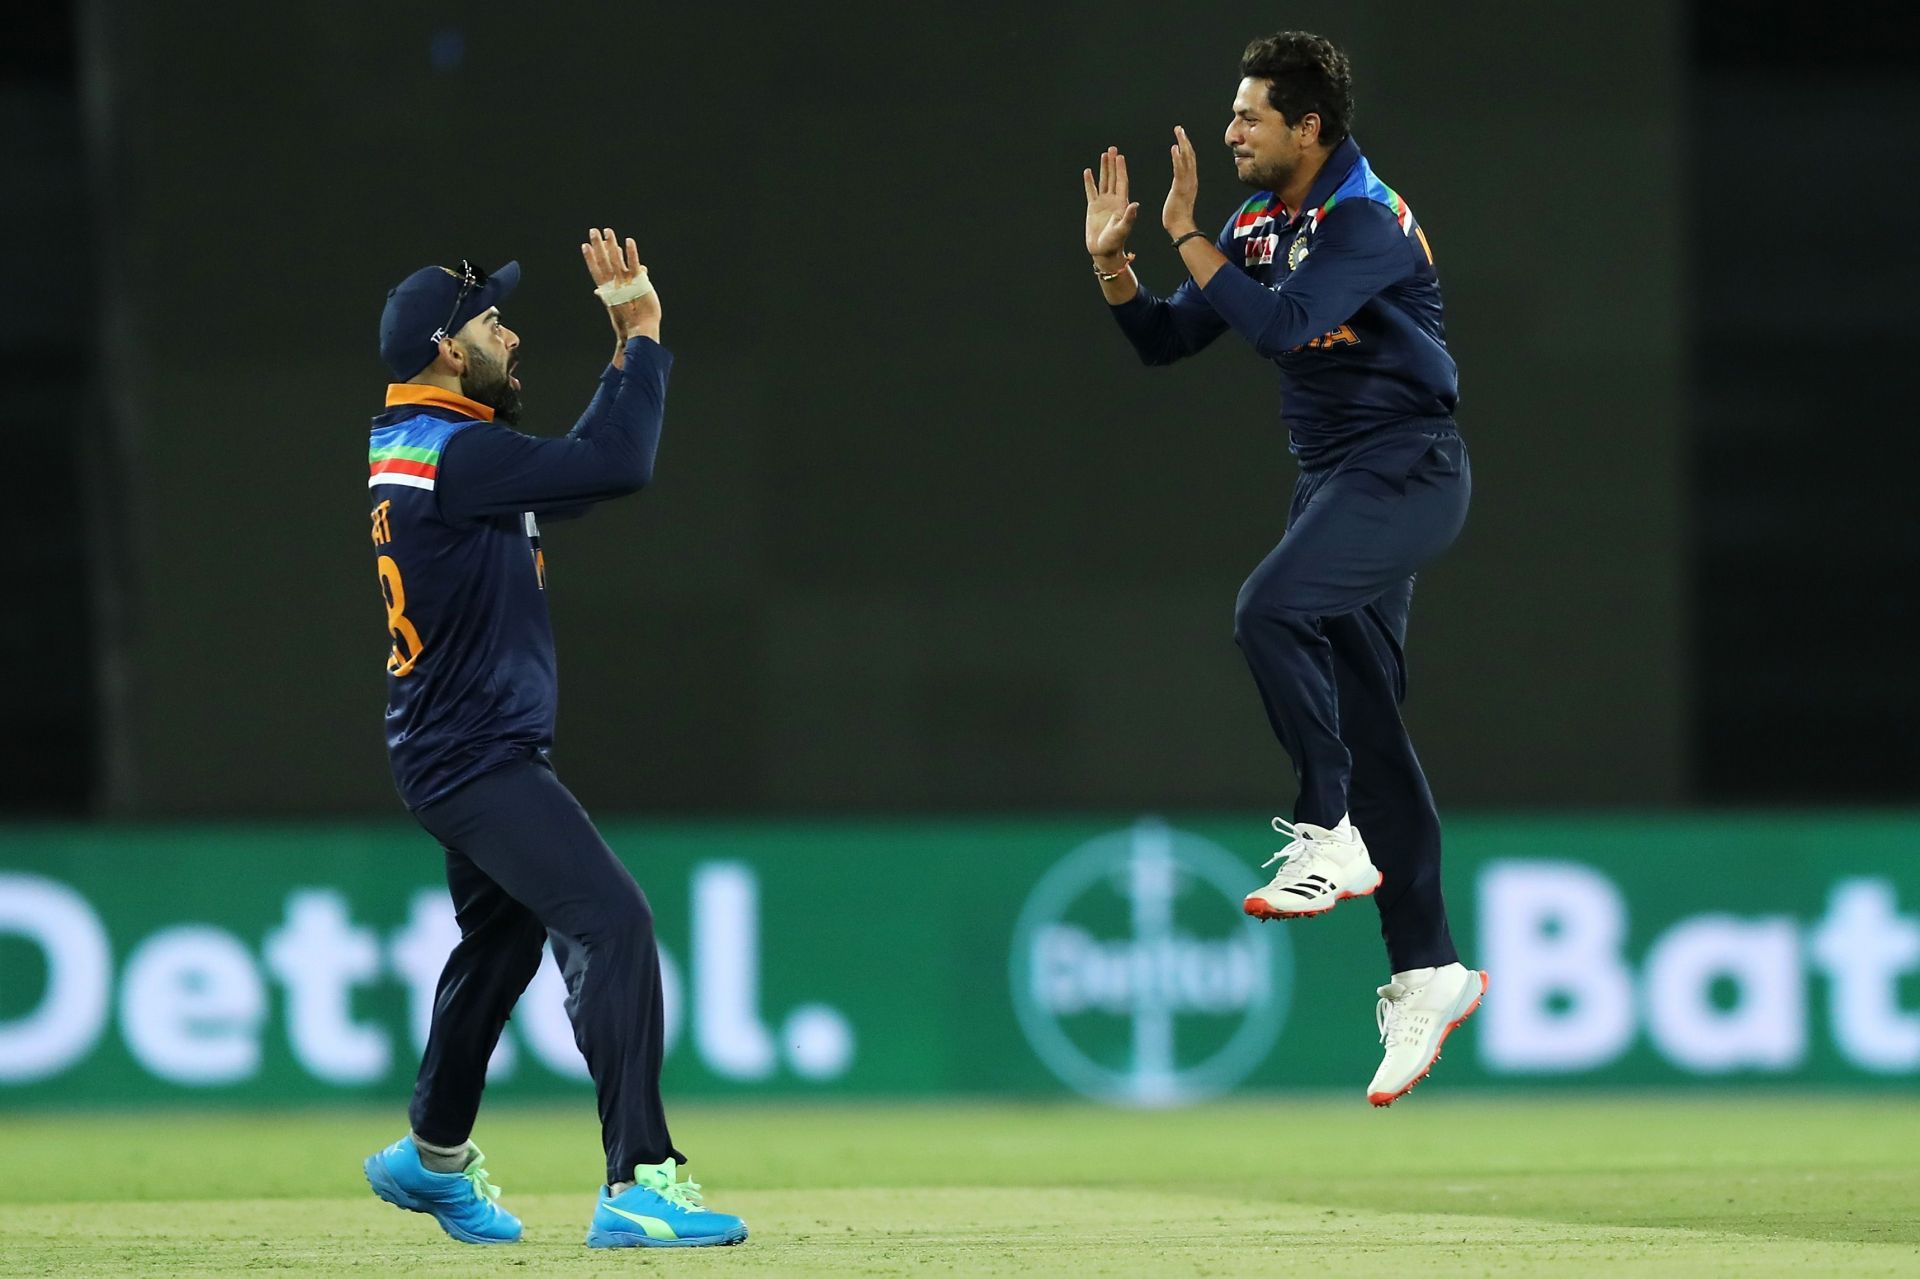 Kuldeep Yadav picked up three wickets in the final T20I against the West Indies